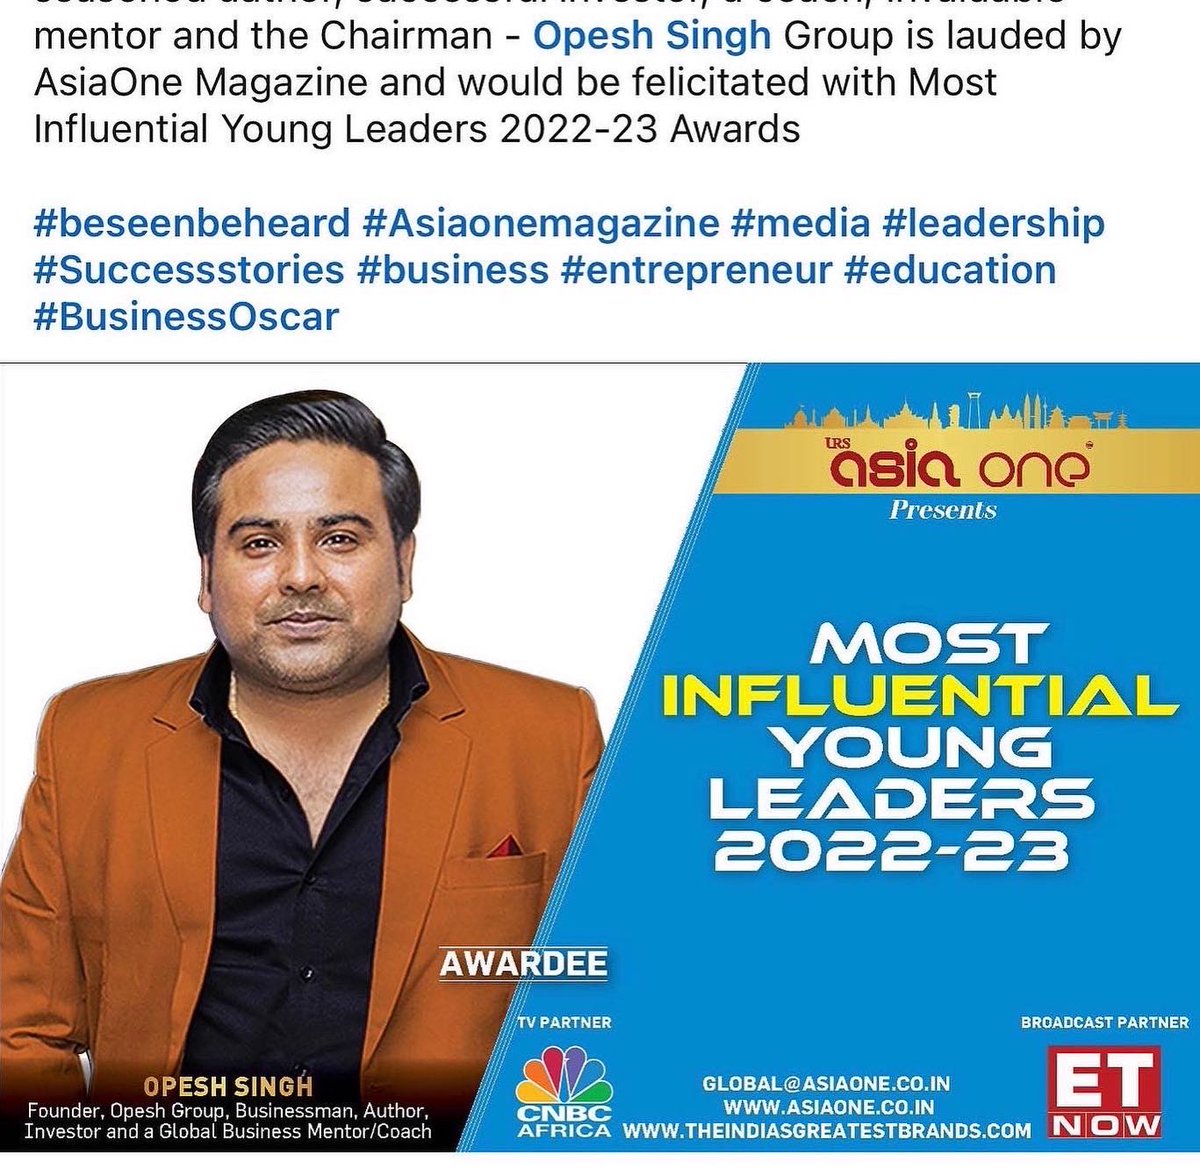 I am immensely grateful to AsiaOne magazine for acknowledging my work and honouring me with such a prestigious award as the Most Influential Young Leaders 2022-23. #opeshsingh ##beseenbeheard #Asiaonemagazine #media #leadership #Successstories #business #entrepreneur #education